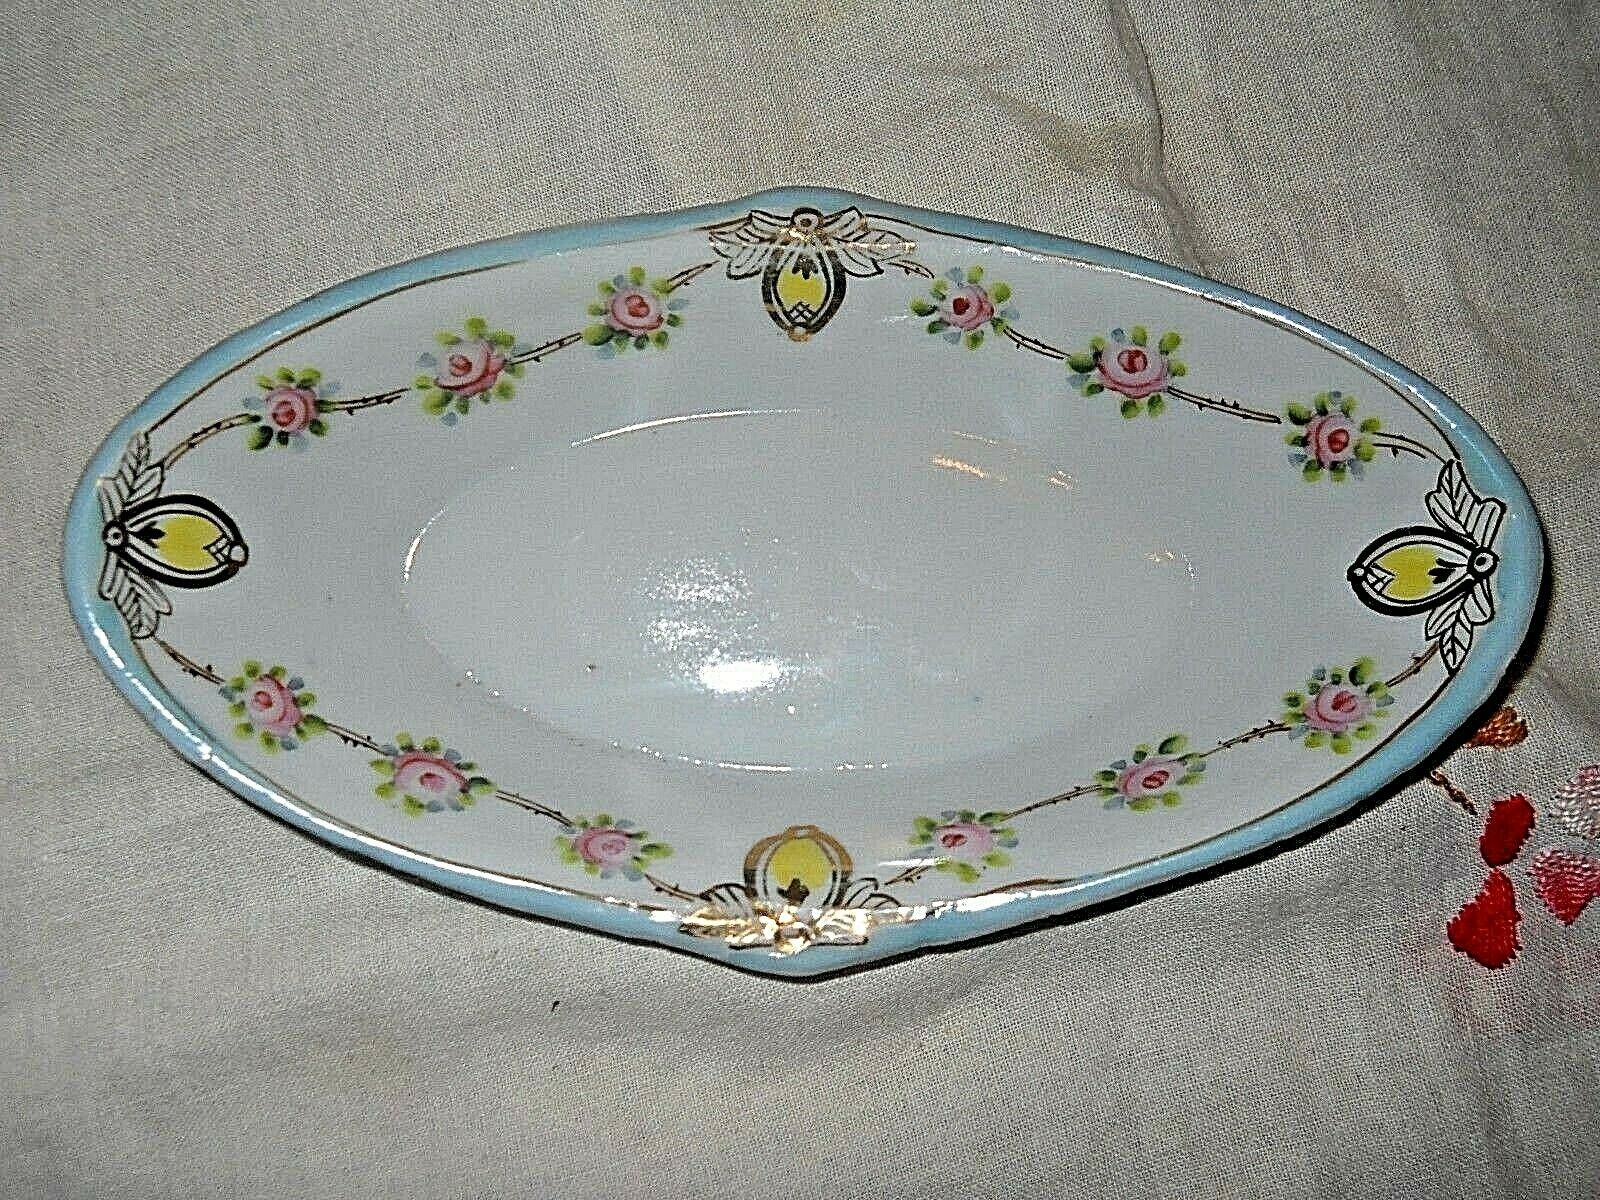 Nippon Mark Crown Star Oval Pink Roses Garland Vintage Nut Candy Dish Blue White